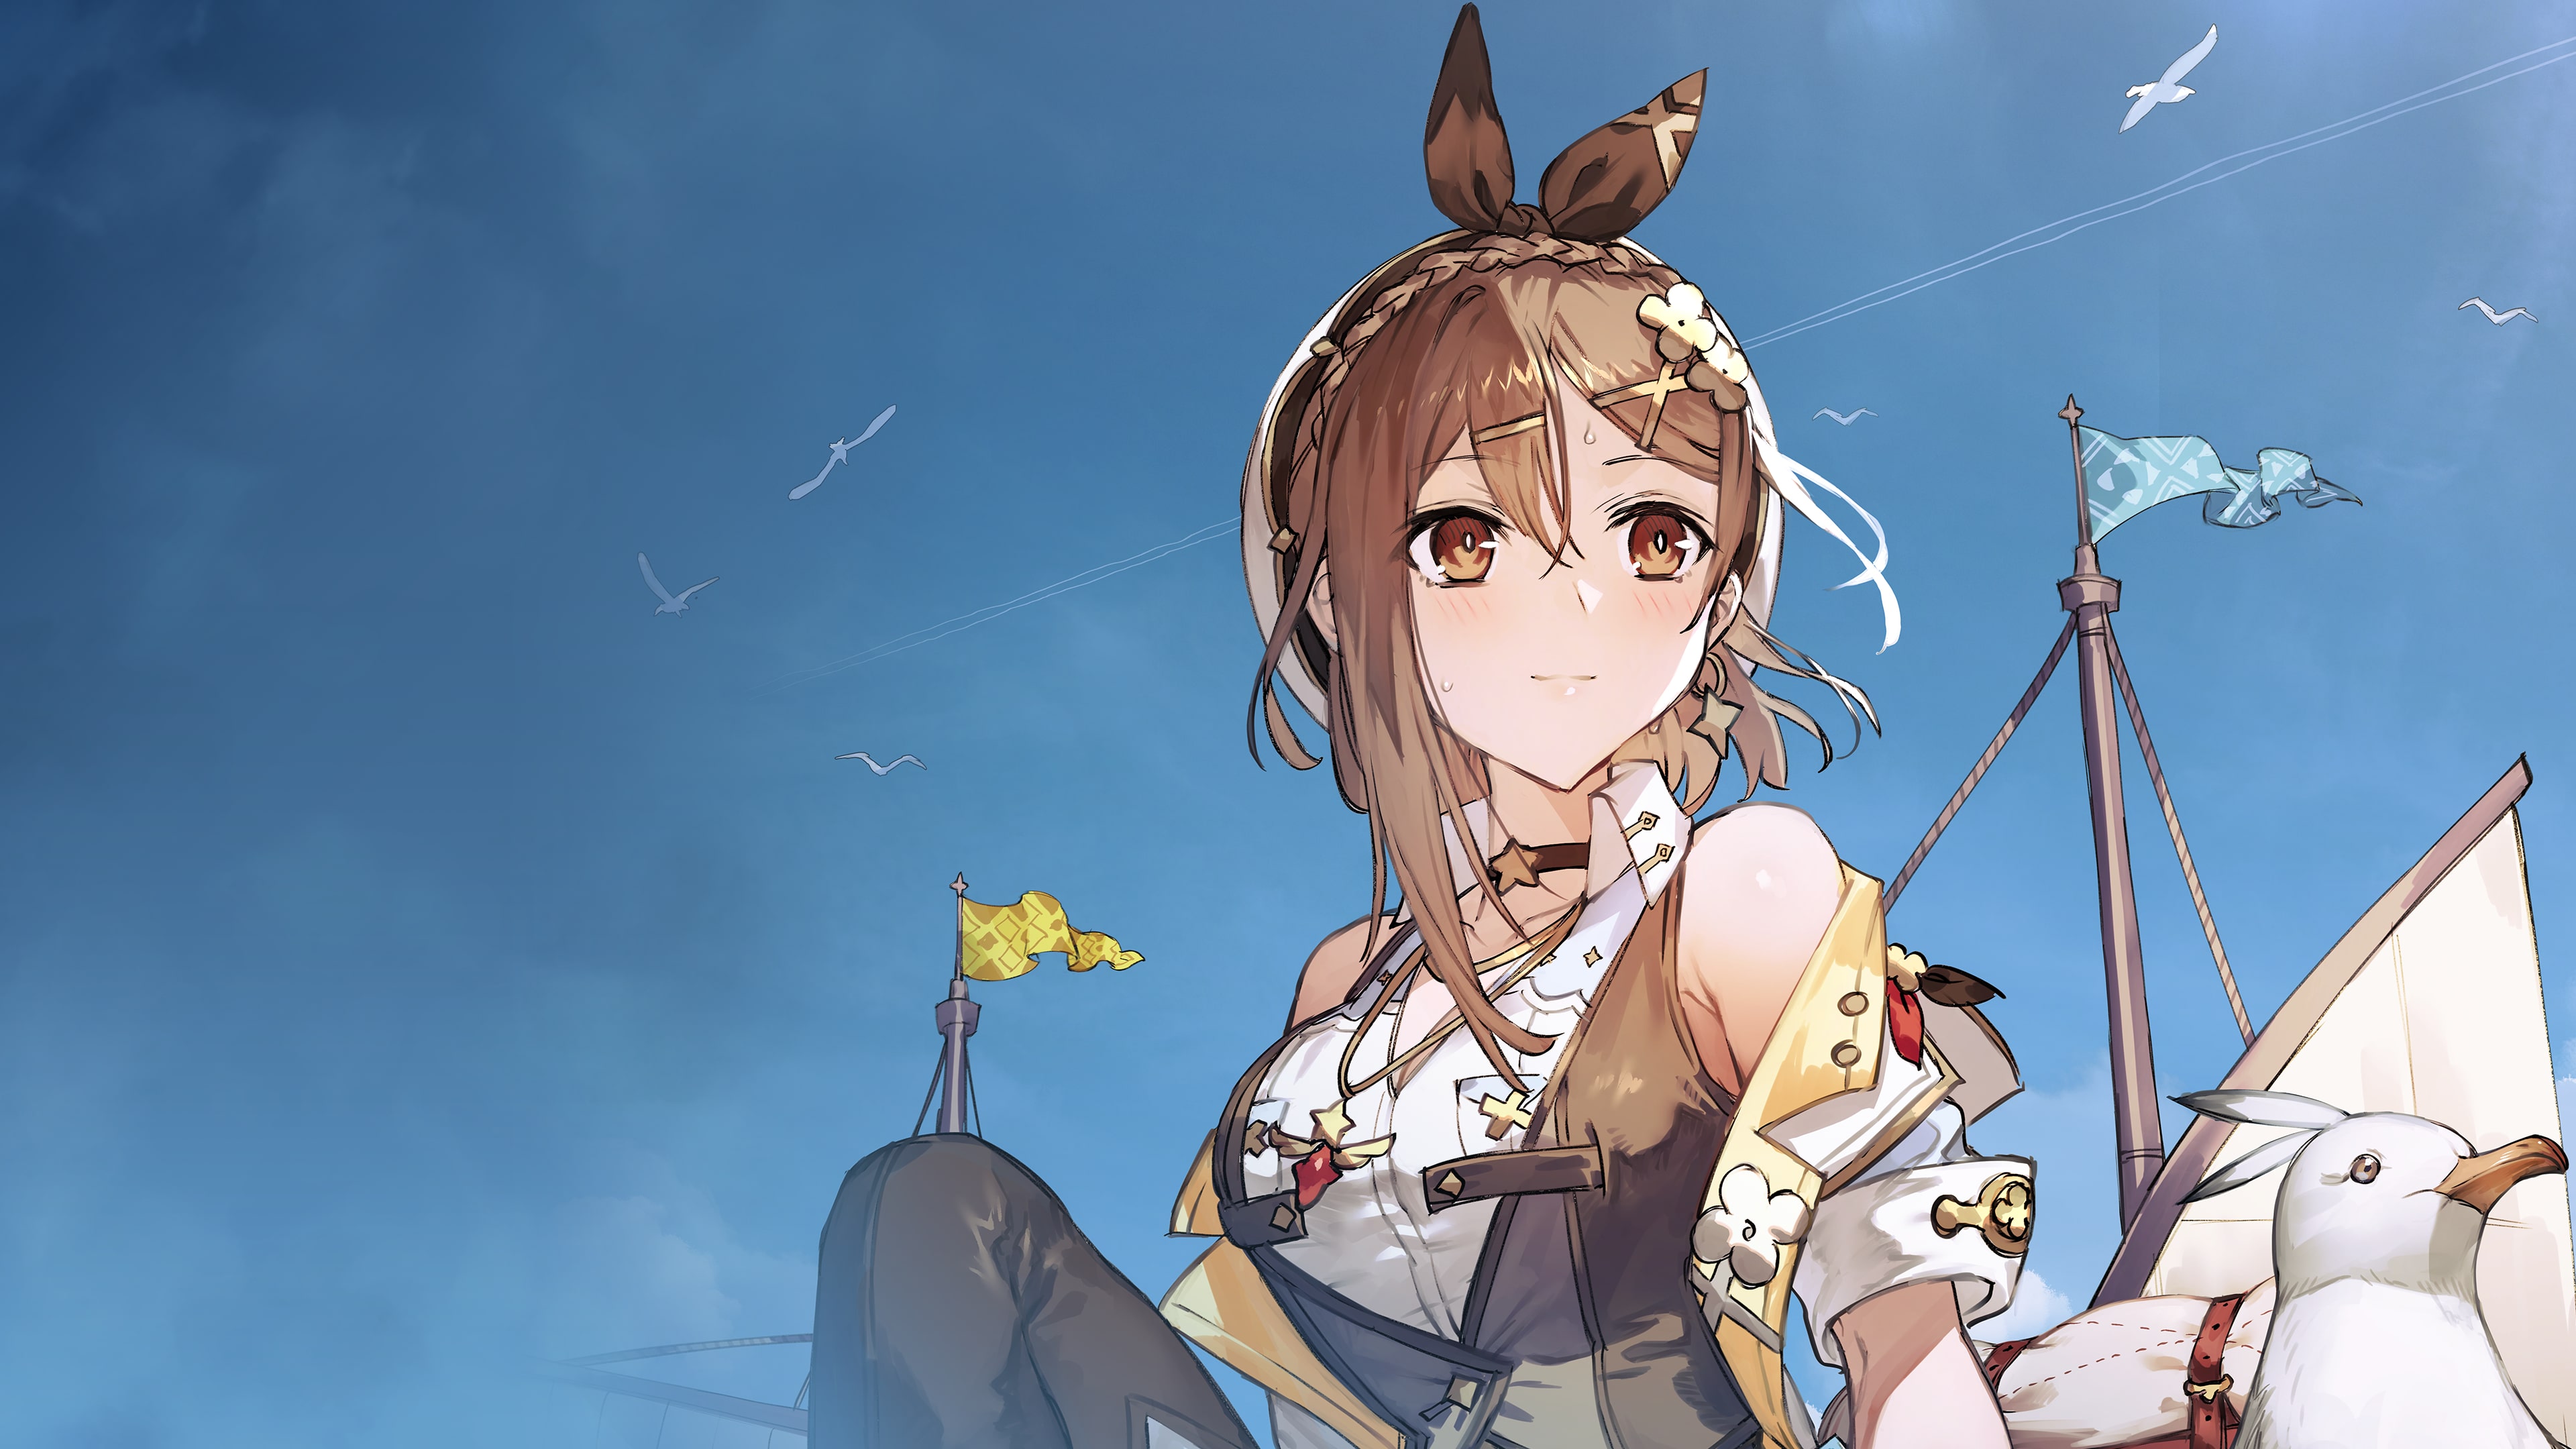 Atelier Ryza 3: Alchemist of the End & the Secret Key Digital Deluxe Edition (PS4 & PS5)